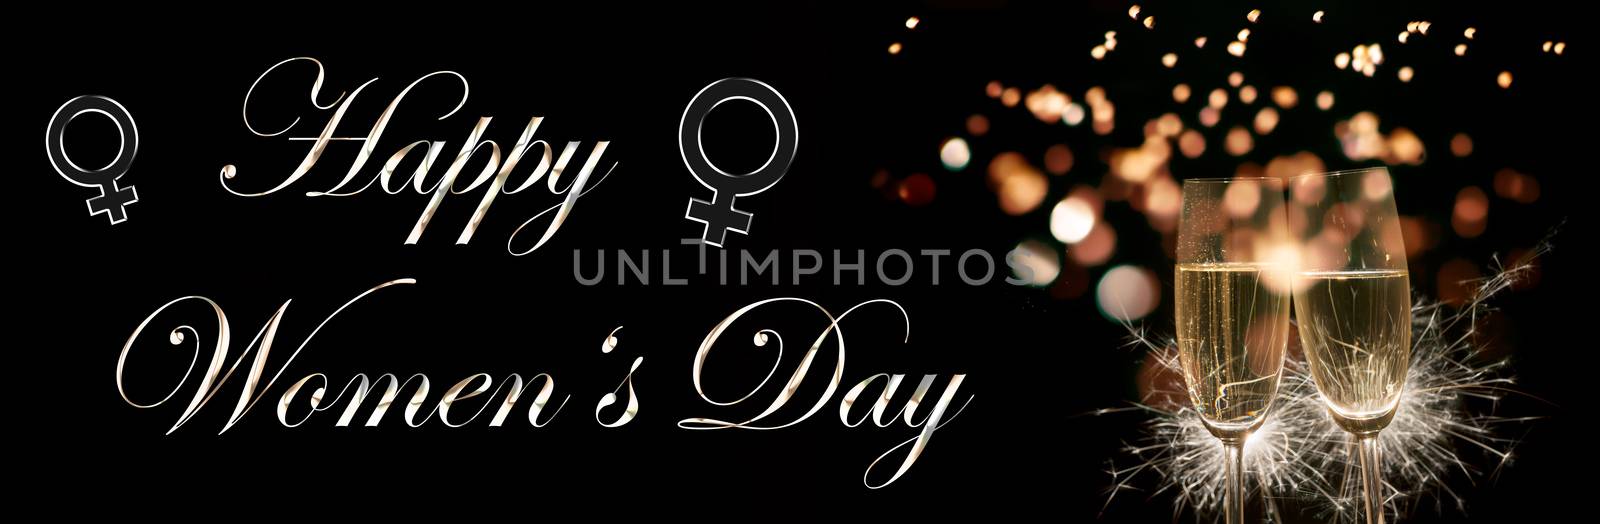 Card Happy Women's Day with two champagne glasses and women's signs on black background